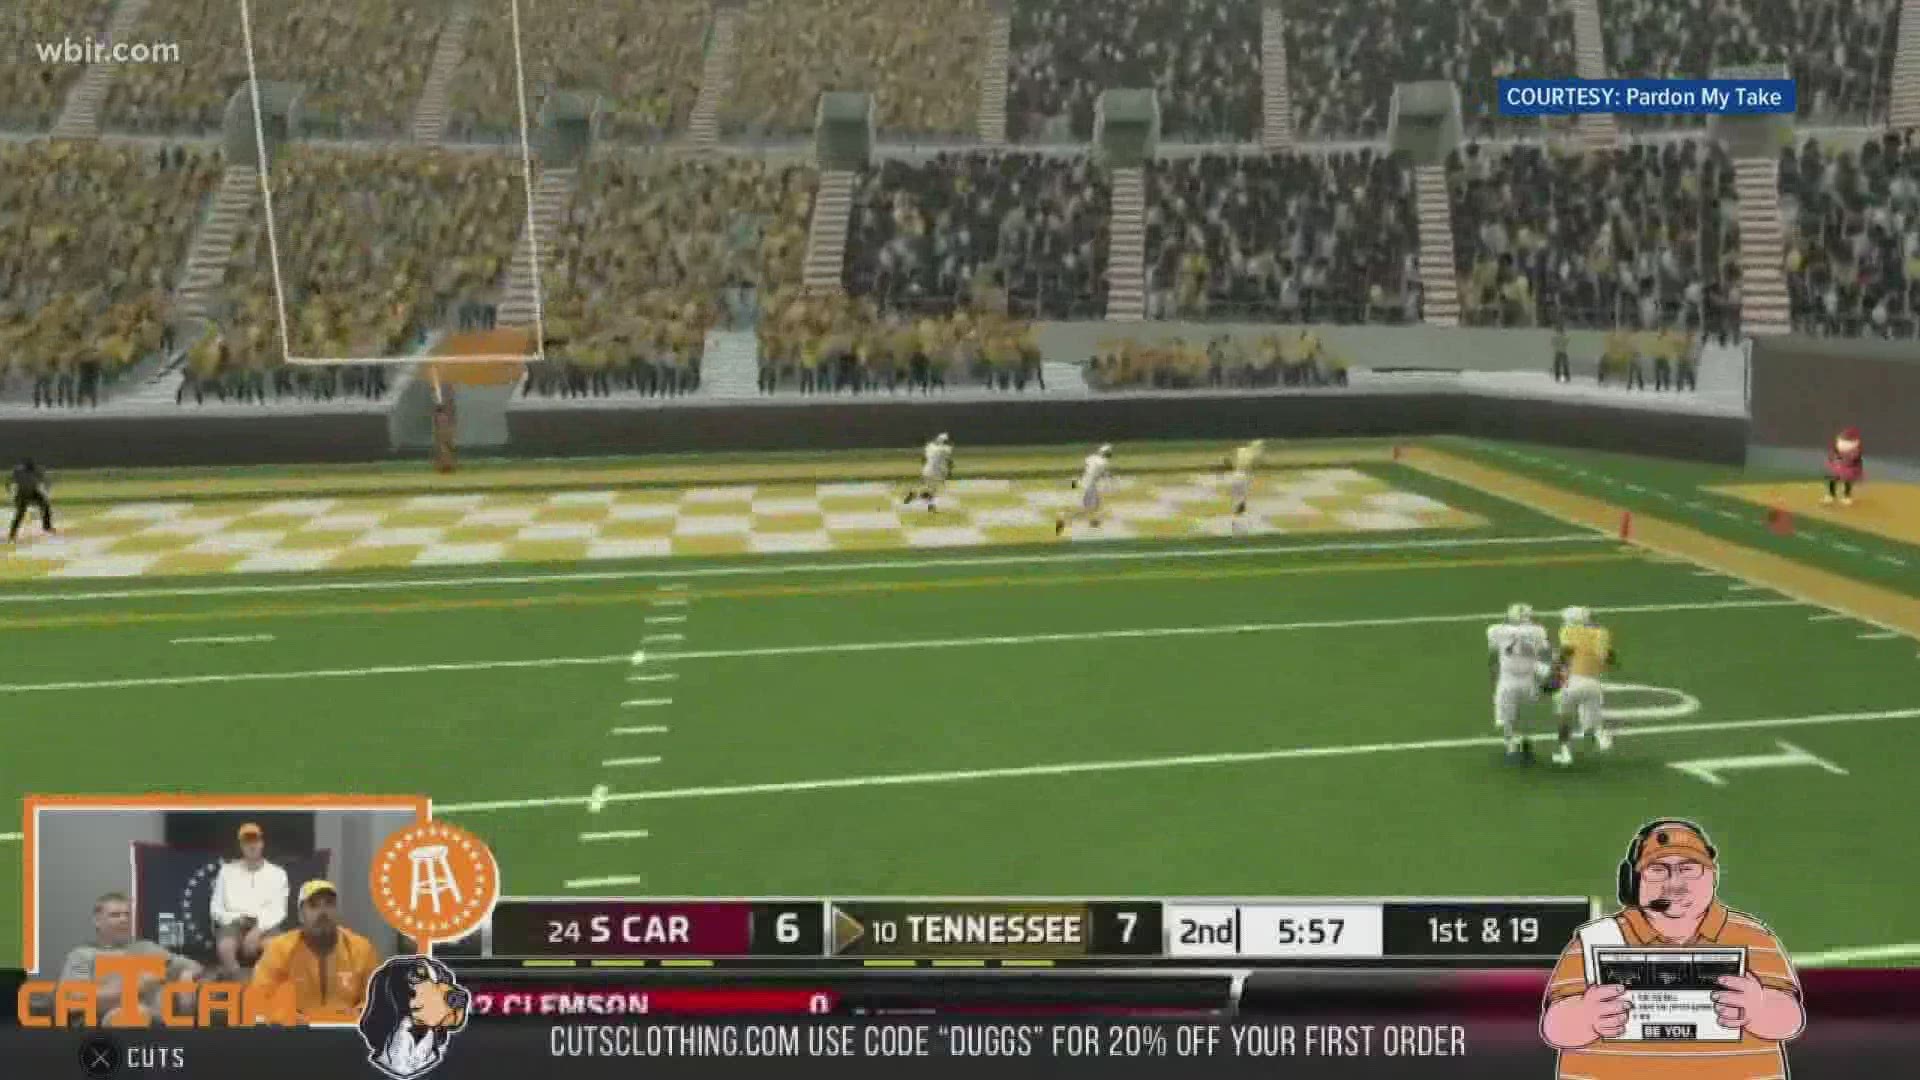 Dan Katz from Barstool sports created coach Duggs and made him the coach of Tennessee Football in a video game.